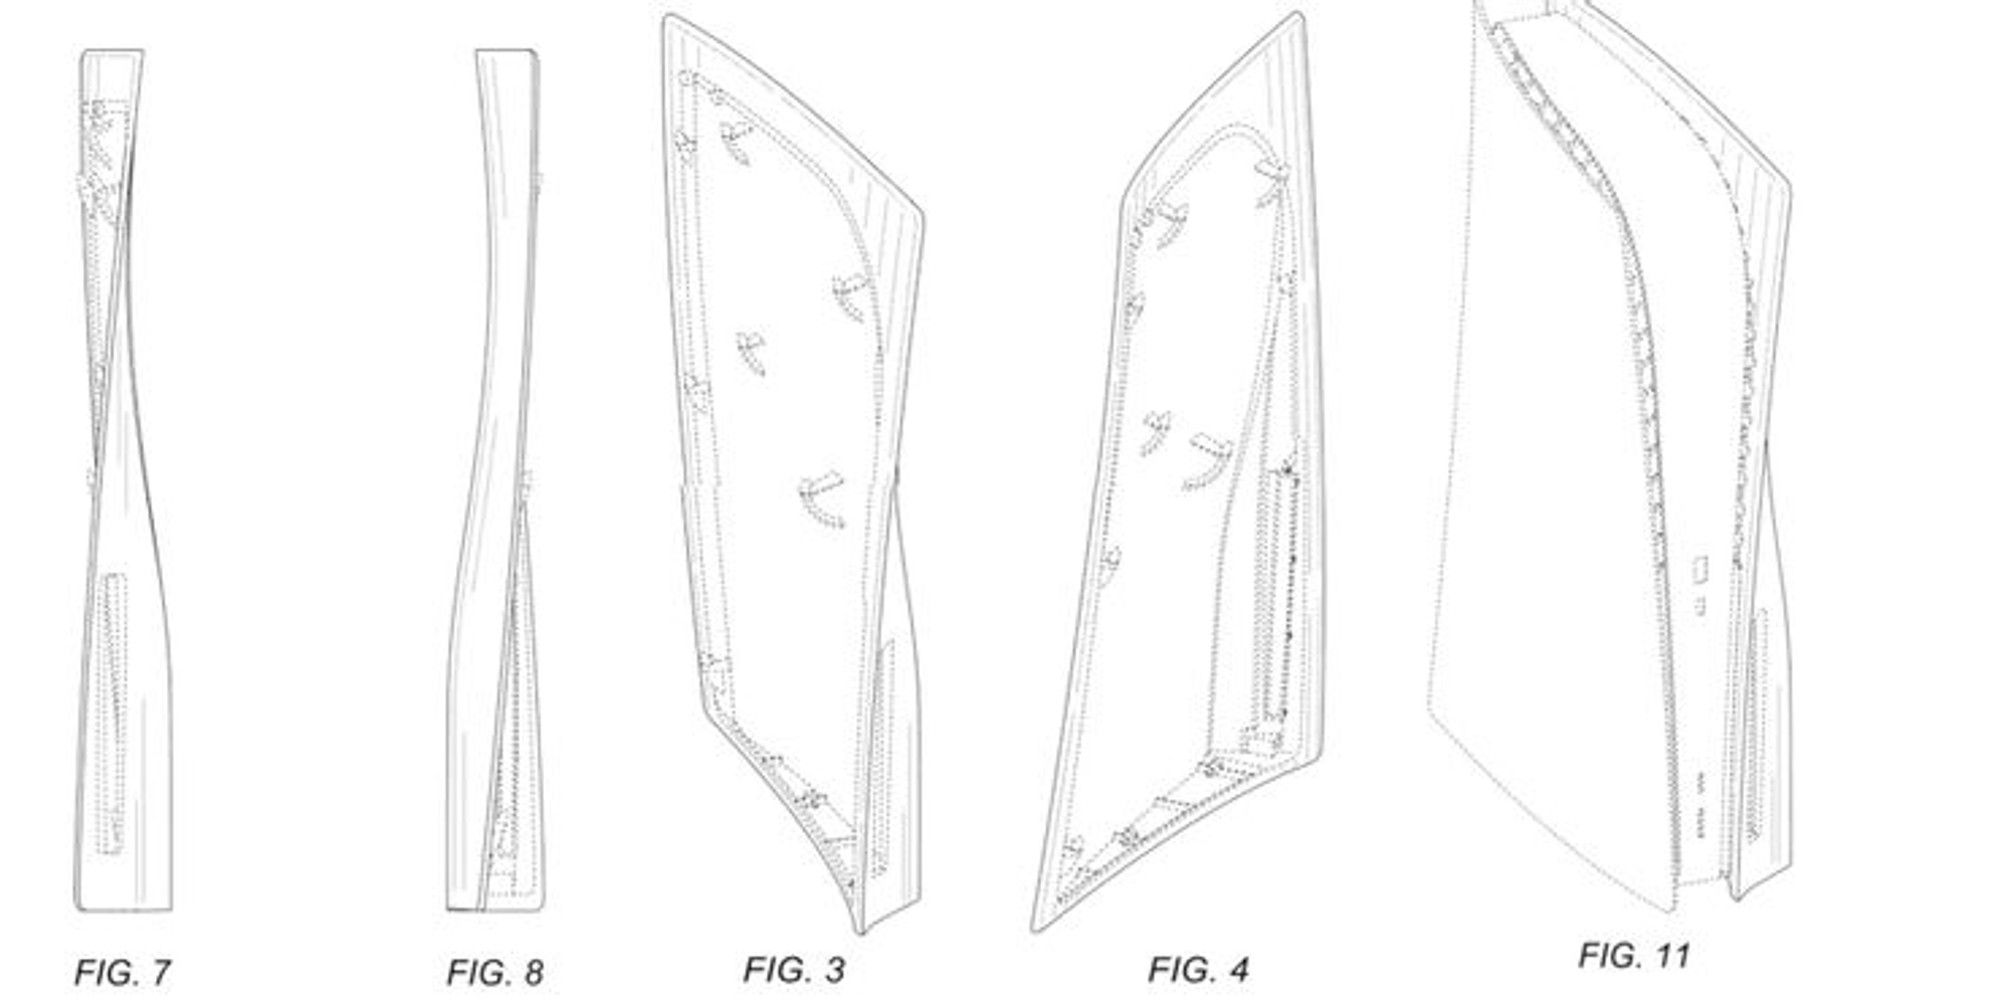 ps5 face plate patent